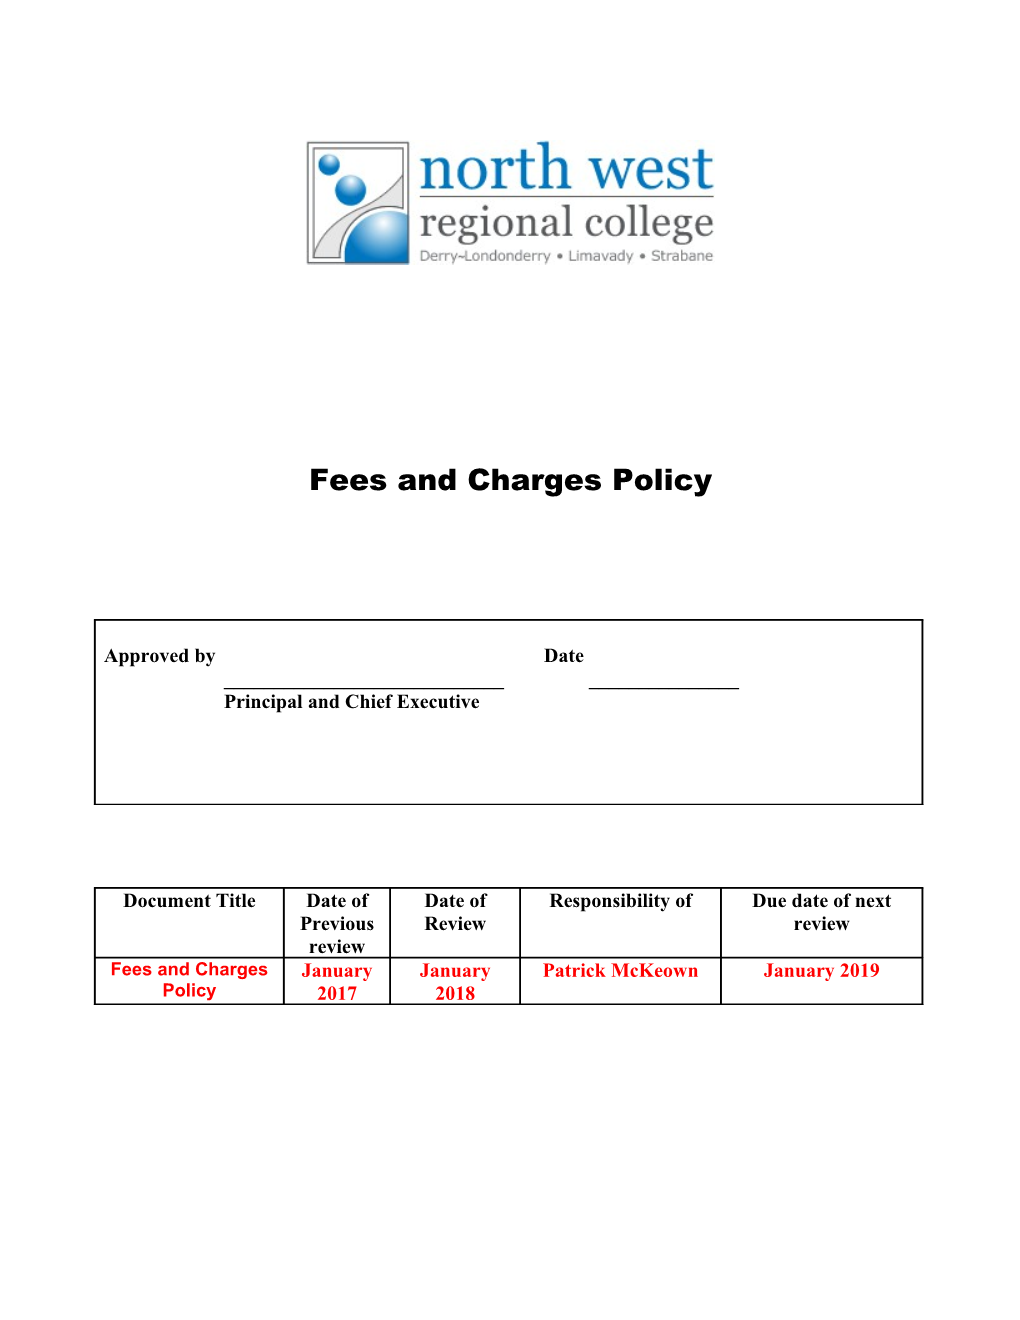 Draft Fees and Charges Policy